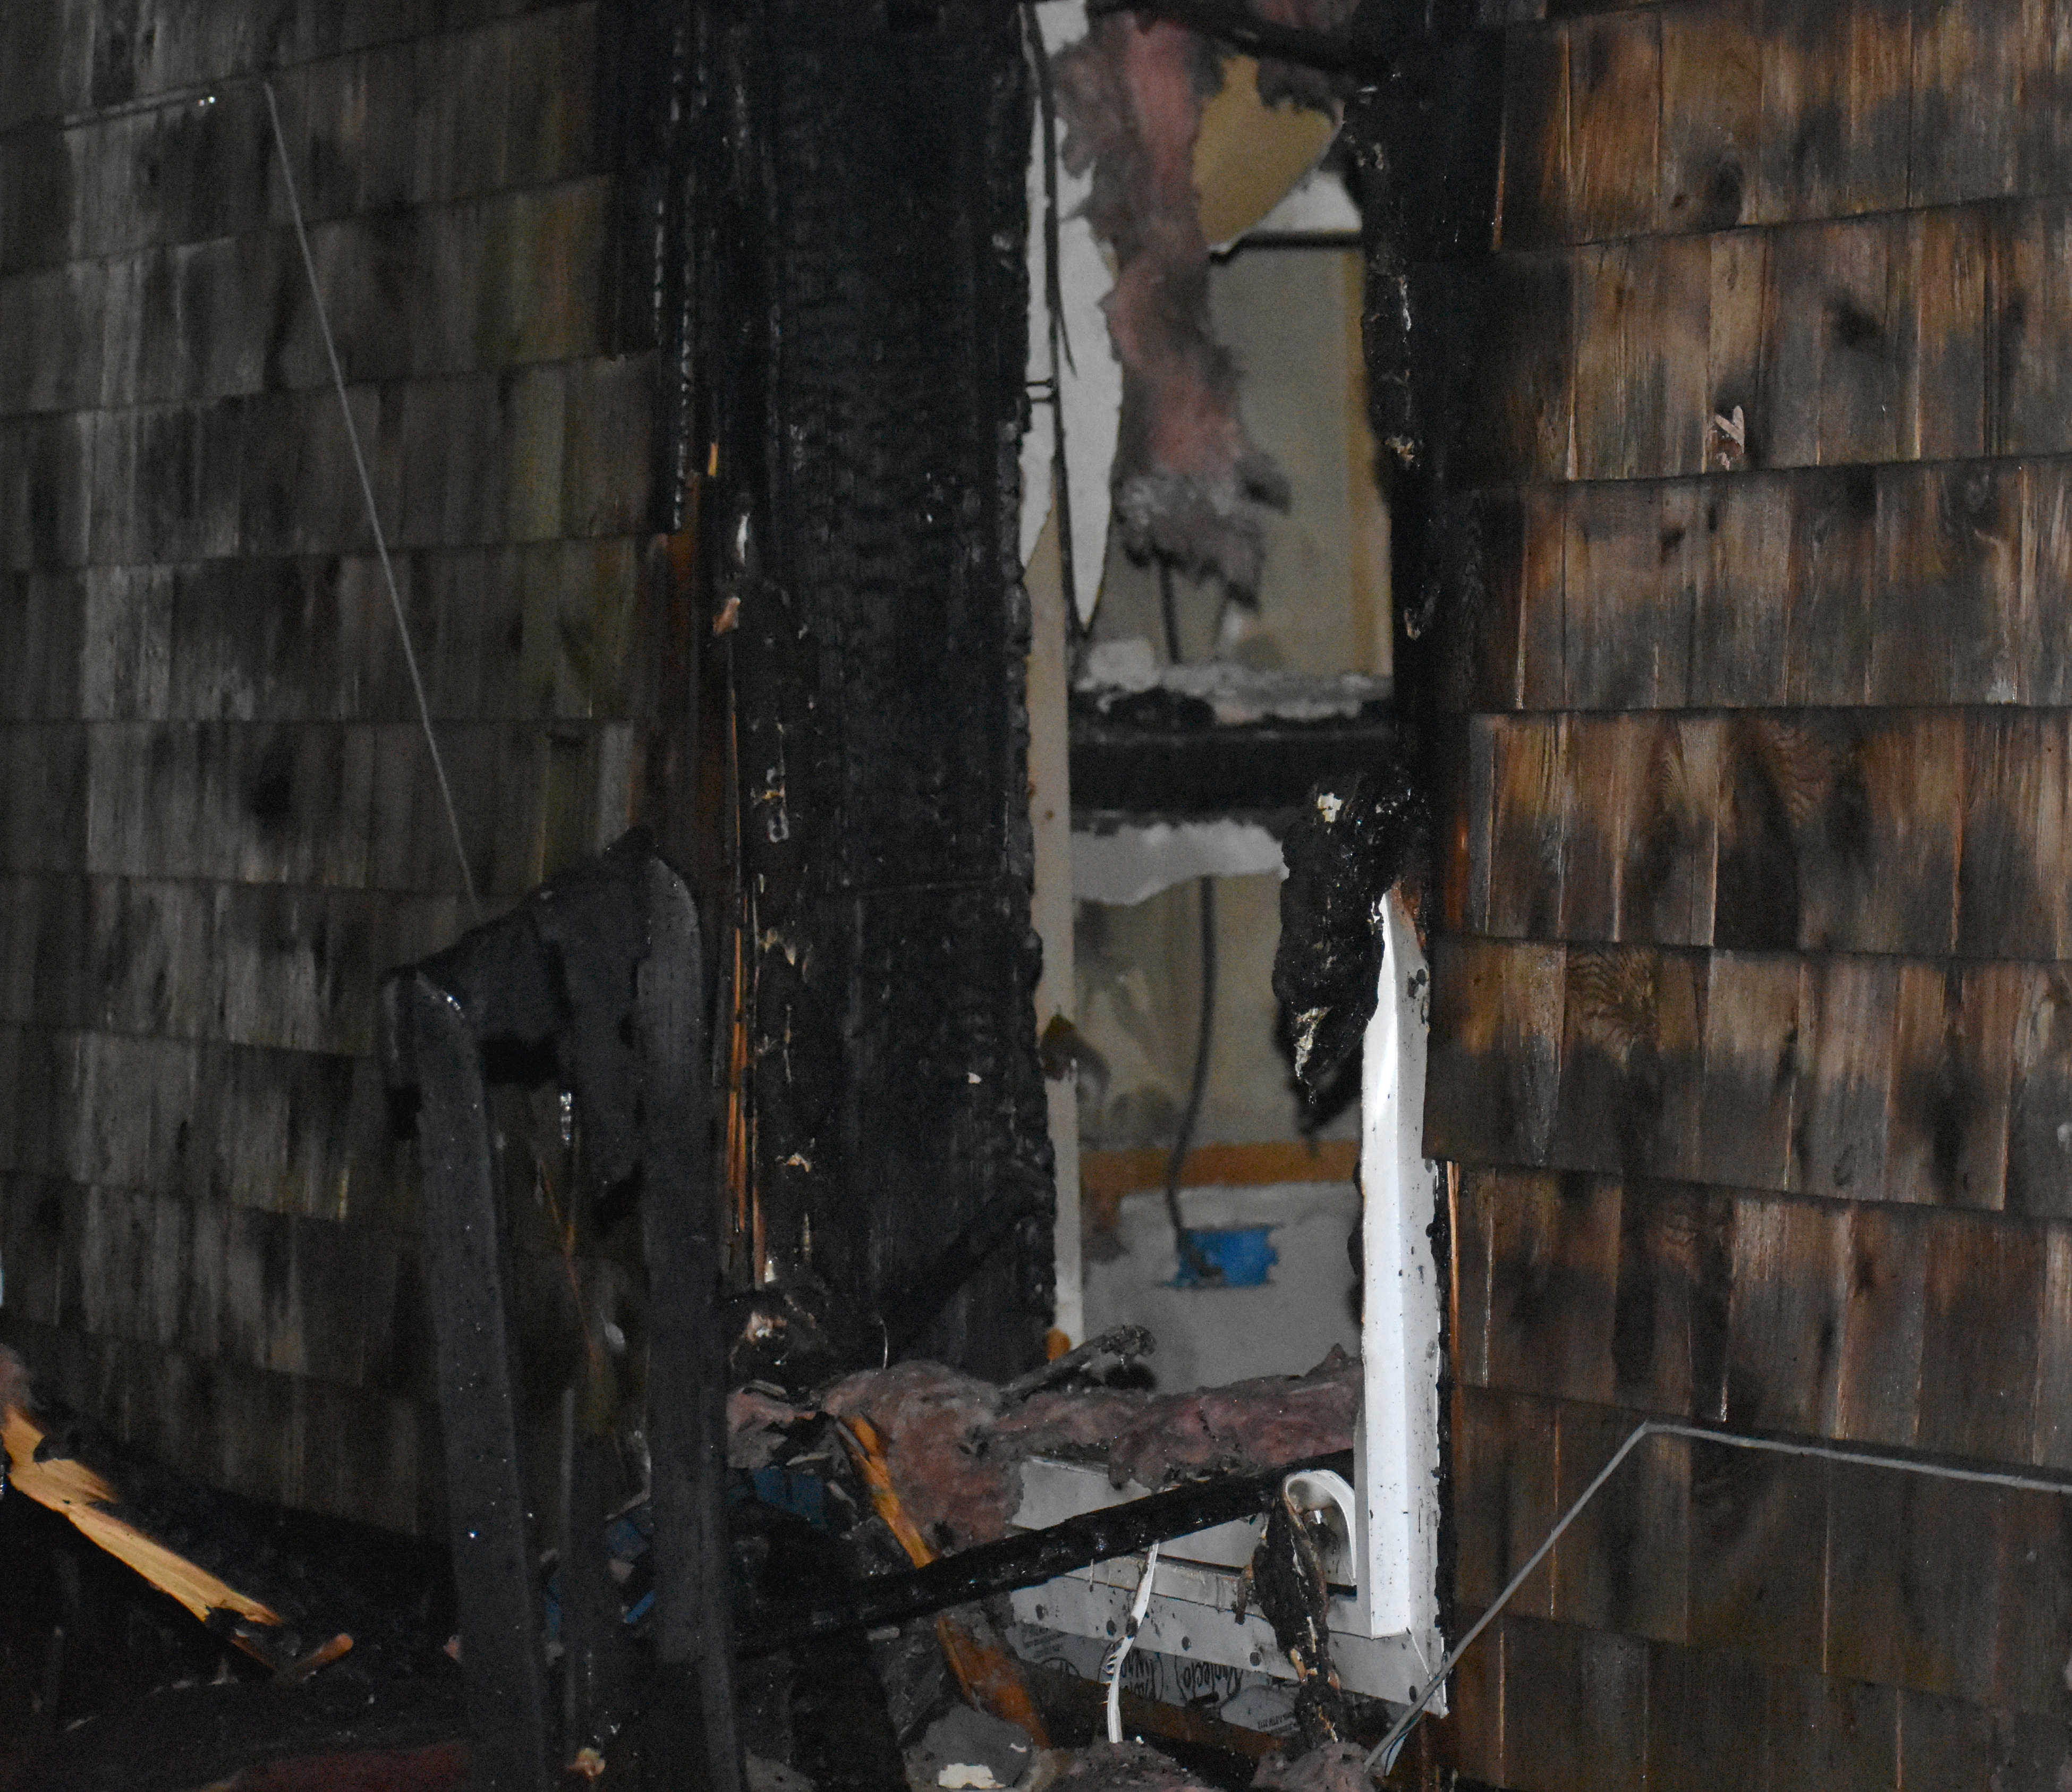 Damage to a first floor apartment unit at 76 Marble Ave, in Waldoboro, from a structure fire on the evening of Thursday, Dec. 27. (Alexander Violo photo)